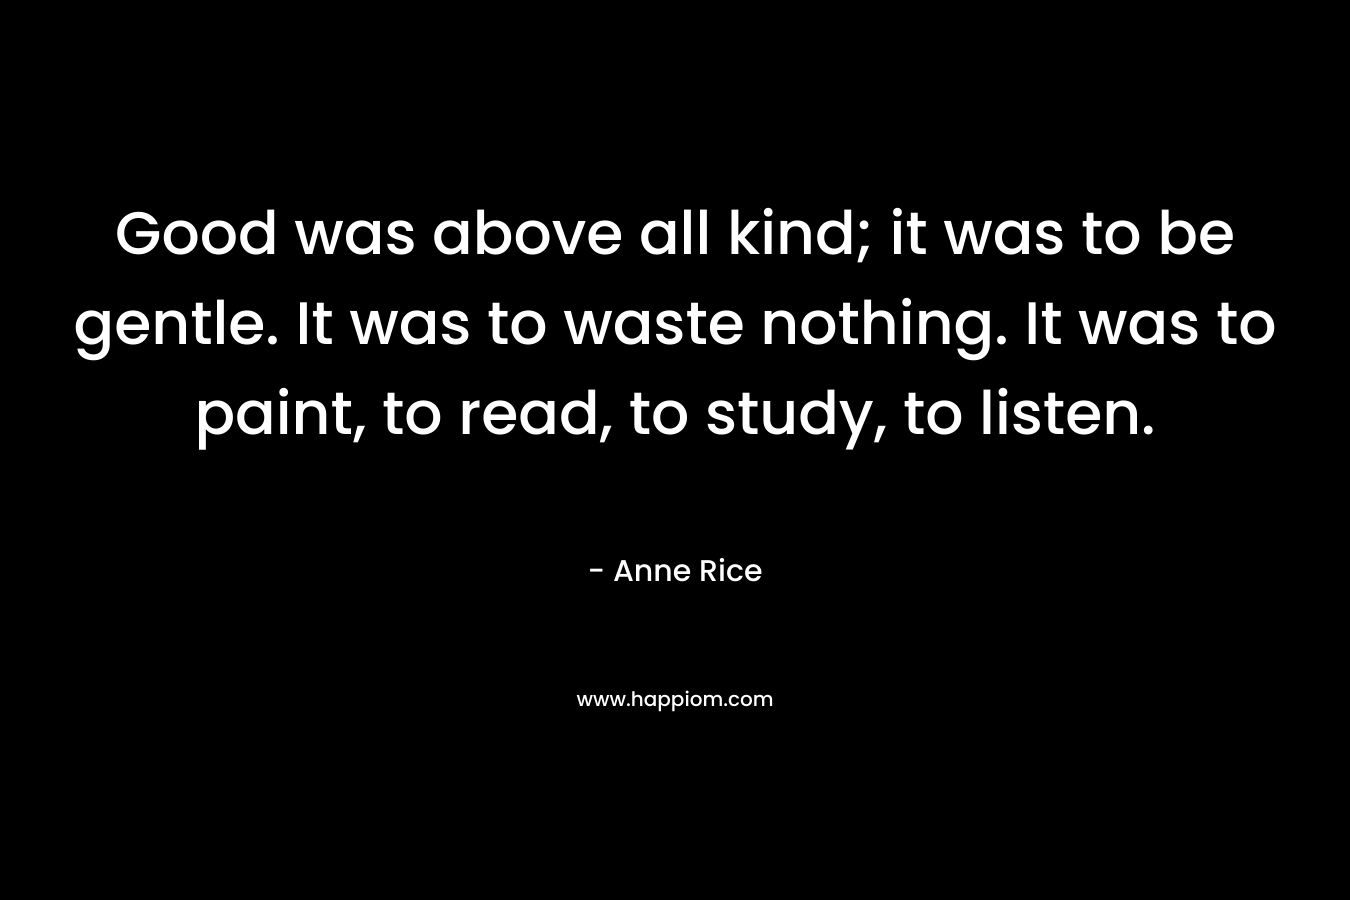 Good was above all kind; it was to be gentle. It was to waste nothing. It was to paint, to read, to study, to listen.